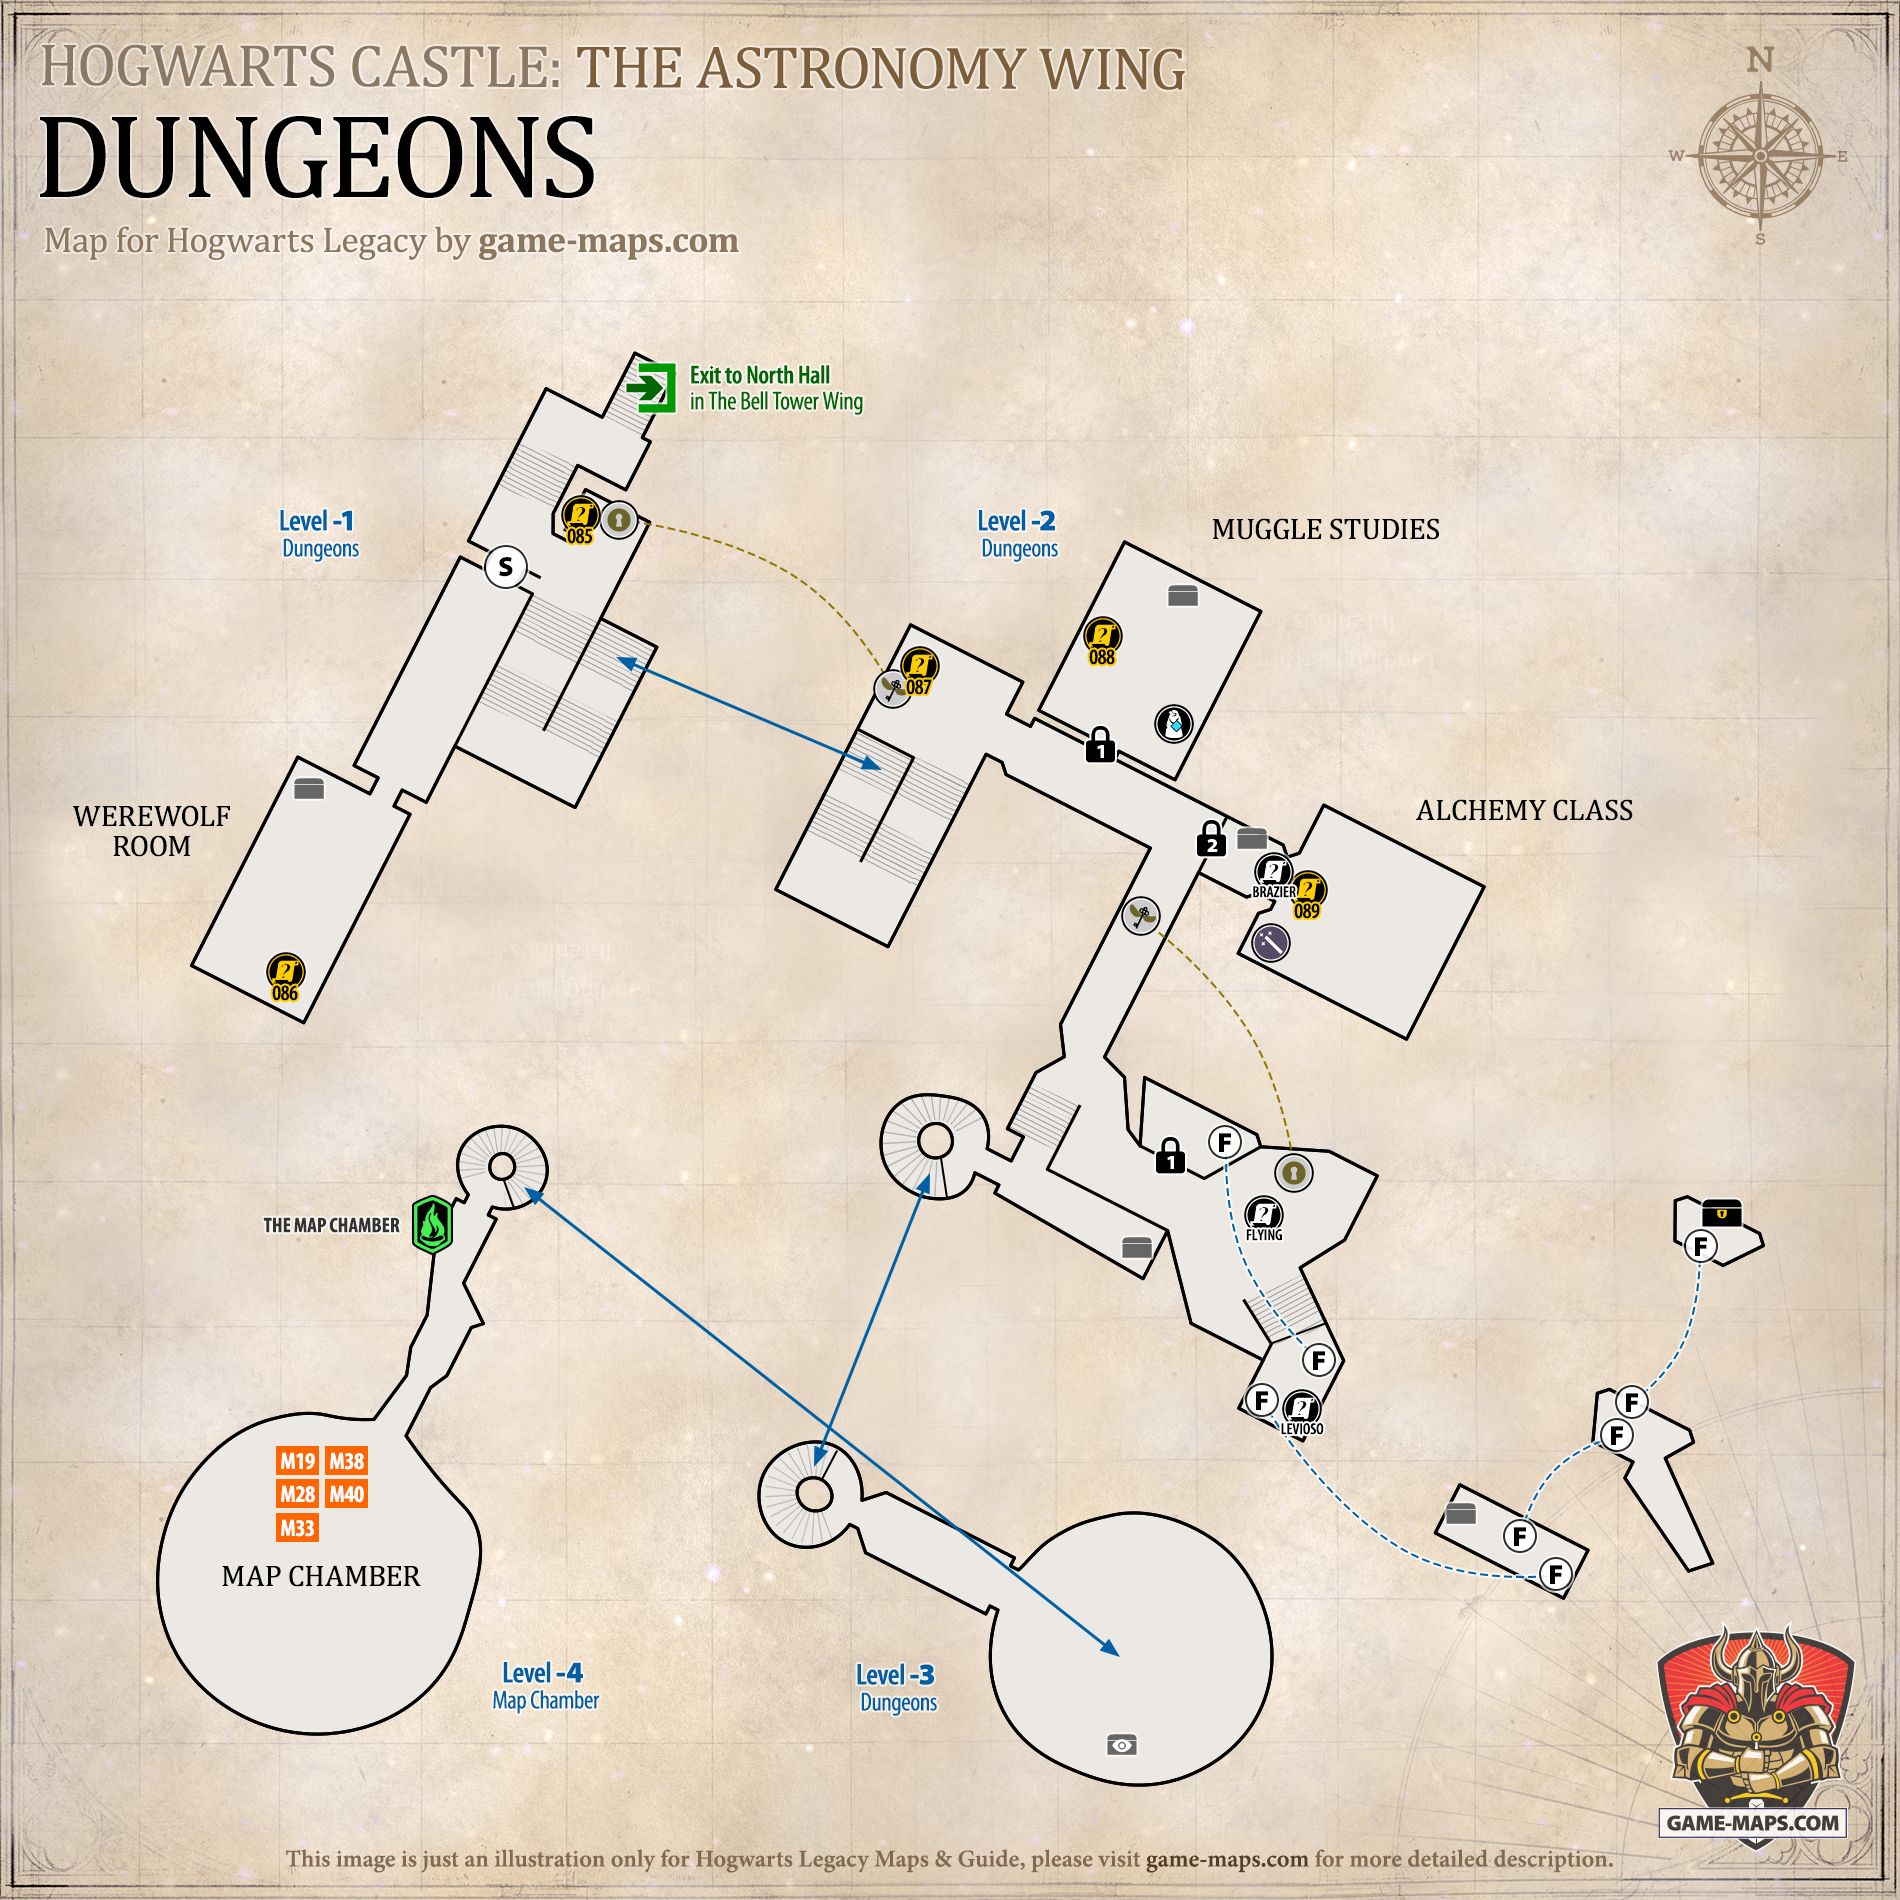 Dungeons Map for Hogwarts Legacy